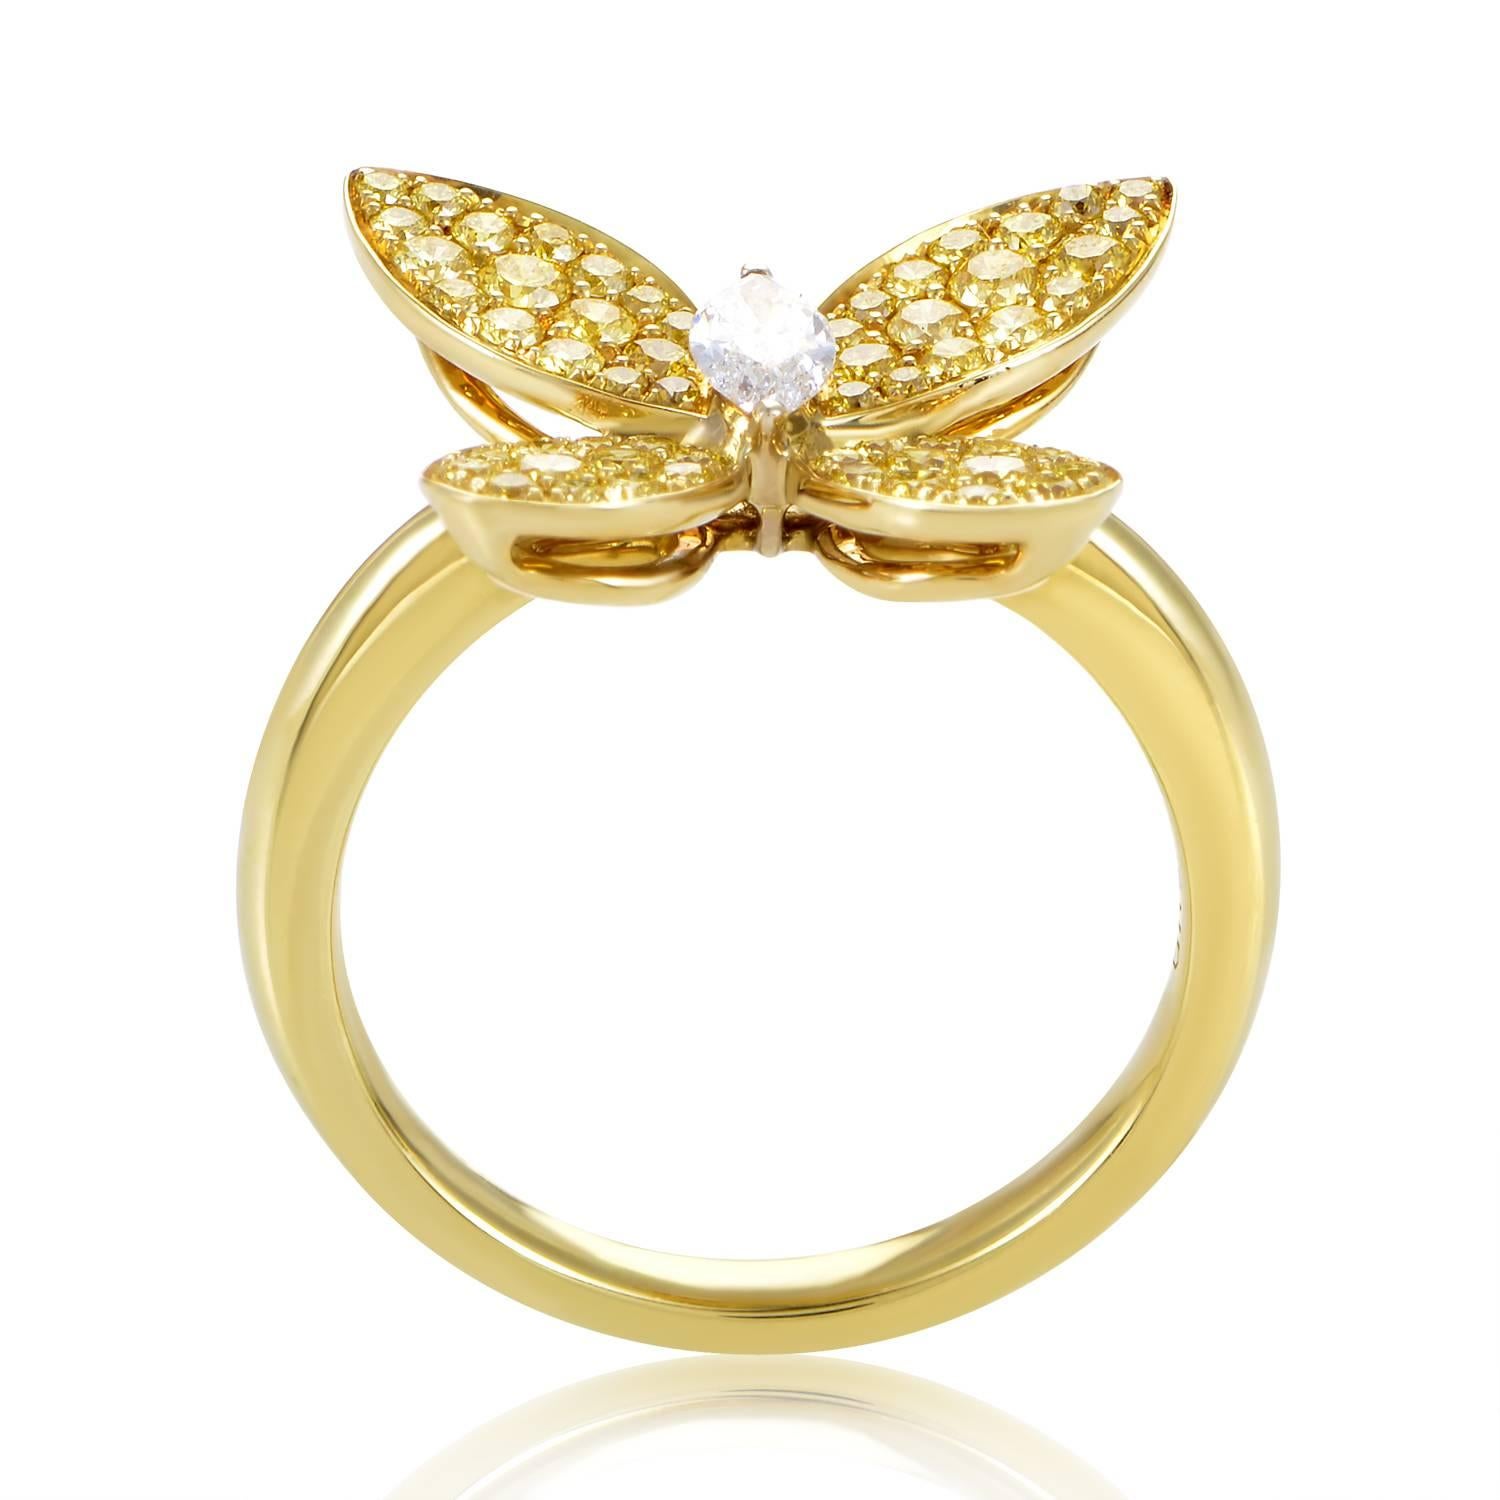 A rare and luxurious jewel, this ring from Graff Diamonds is an absolute delight! The ring is made of 18K yellow gold and boasts a spectacular butterfly motif comprised of a .25ct marquise-cut white diamond body and 1ct of fancy vivid yellow diamond